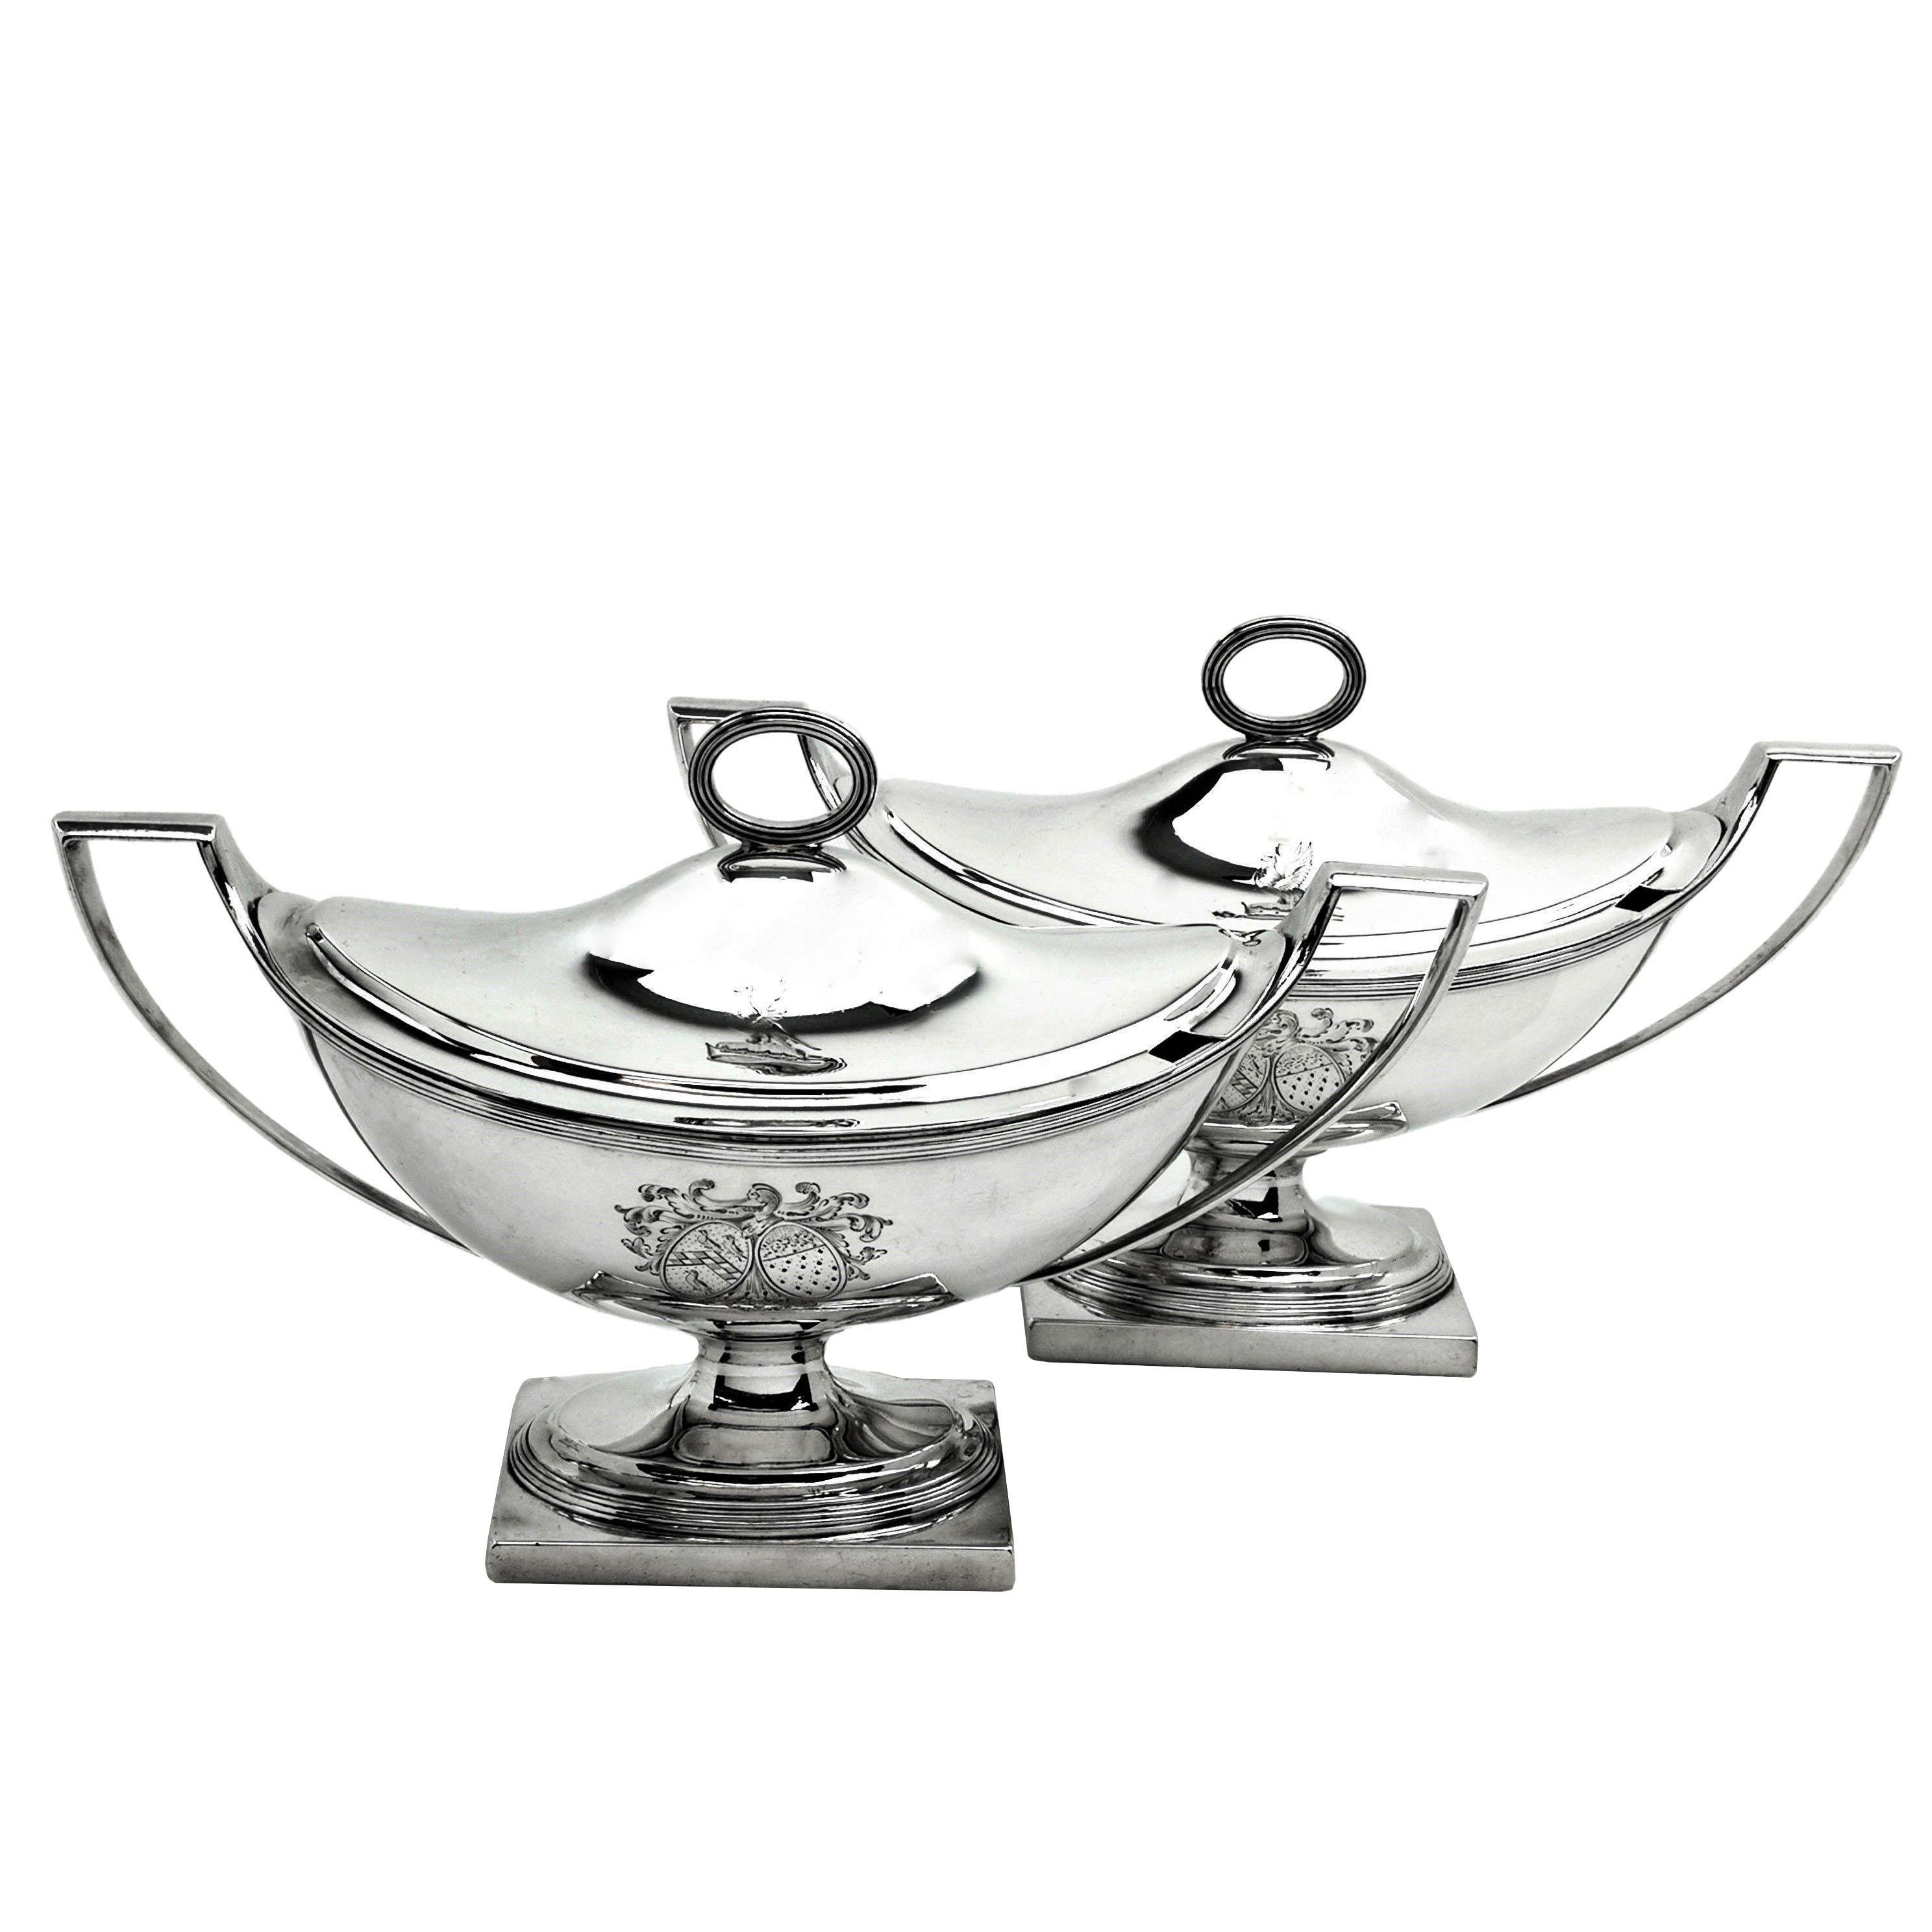 English Set of 4 Antique Georgian Silver Sauce Tureens 1793 George III Serving Dishes For Sale